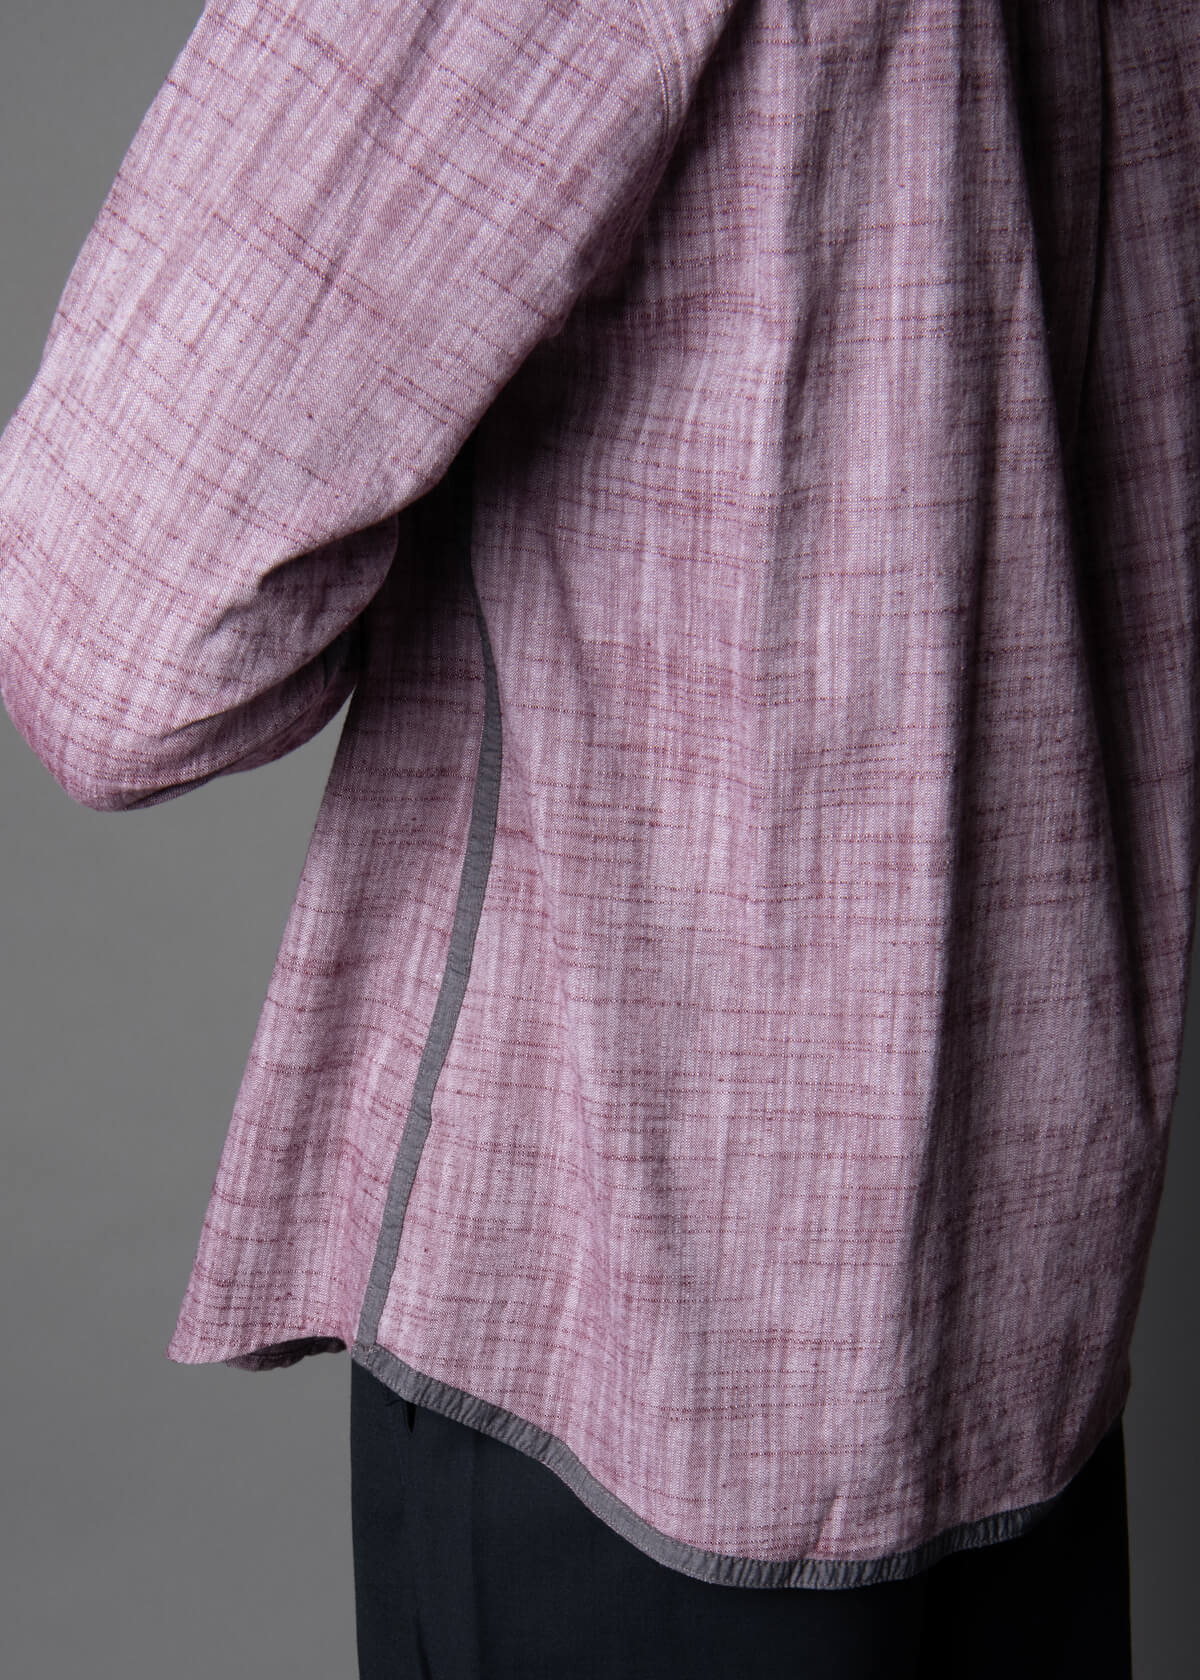 relaxed fit mens shirt in a purple tone